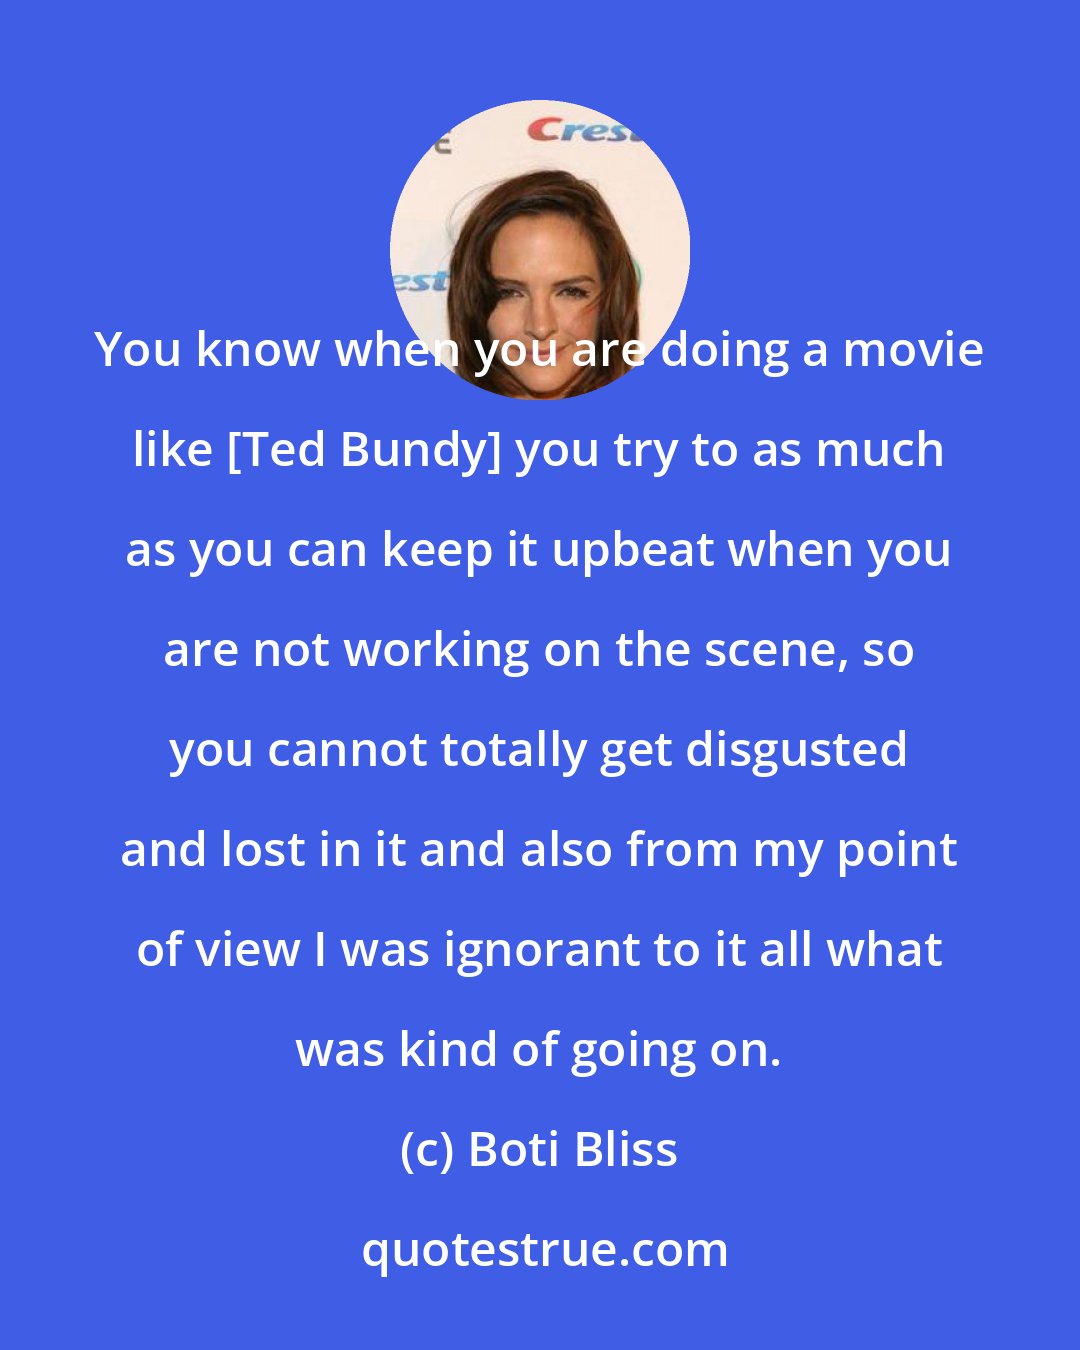 Boti Bliss: You know when you are doing a movie like [Ted Bundy] you try to as much as you can keep it upbeat when you are not working on the scene, so you cannot totally get disgusted and lost in it and also from my point of view I was ignorant to it all what was kind of going on.